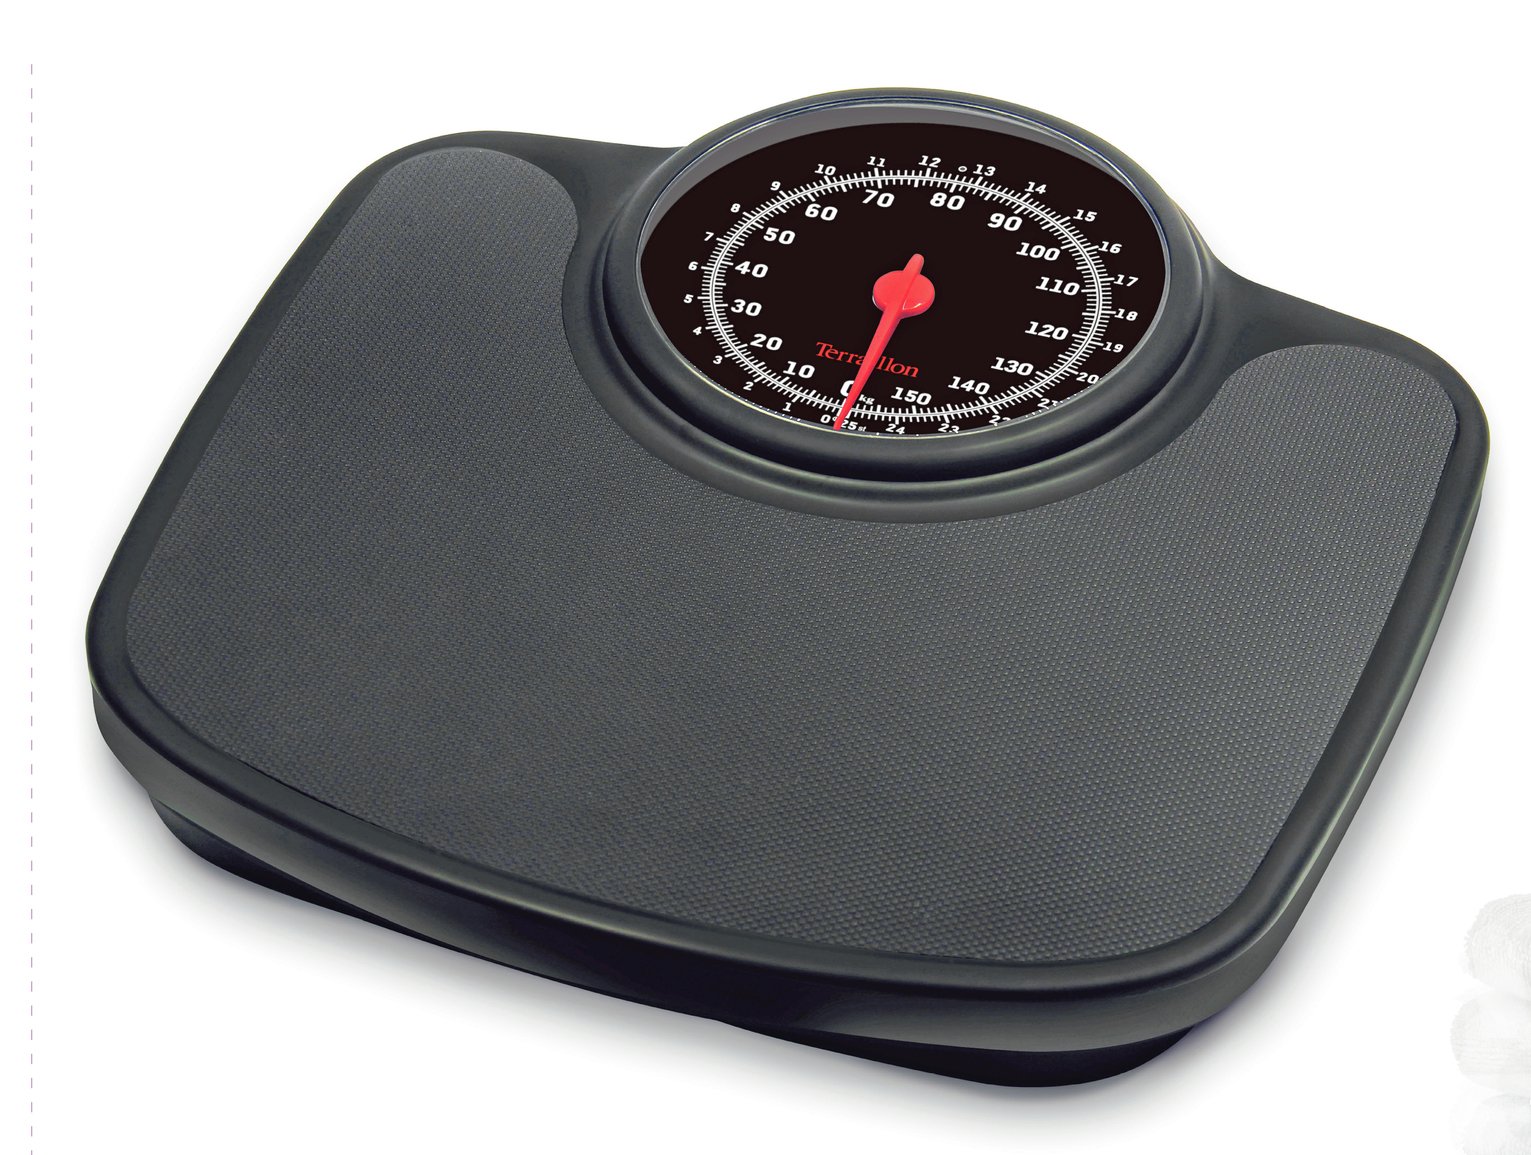 Terraillon Neo Doctors Style Mechanical Bathroom Scales Review